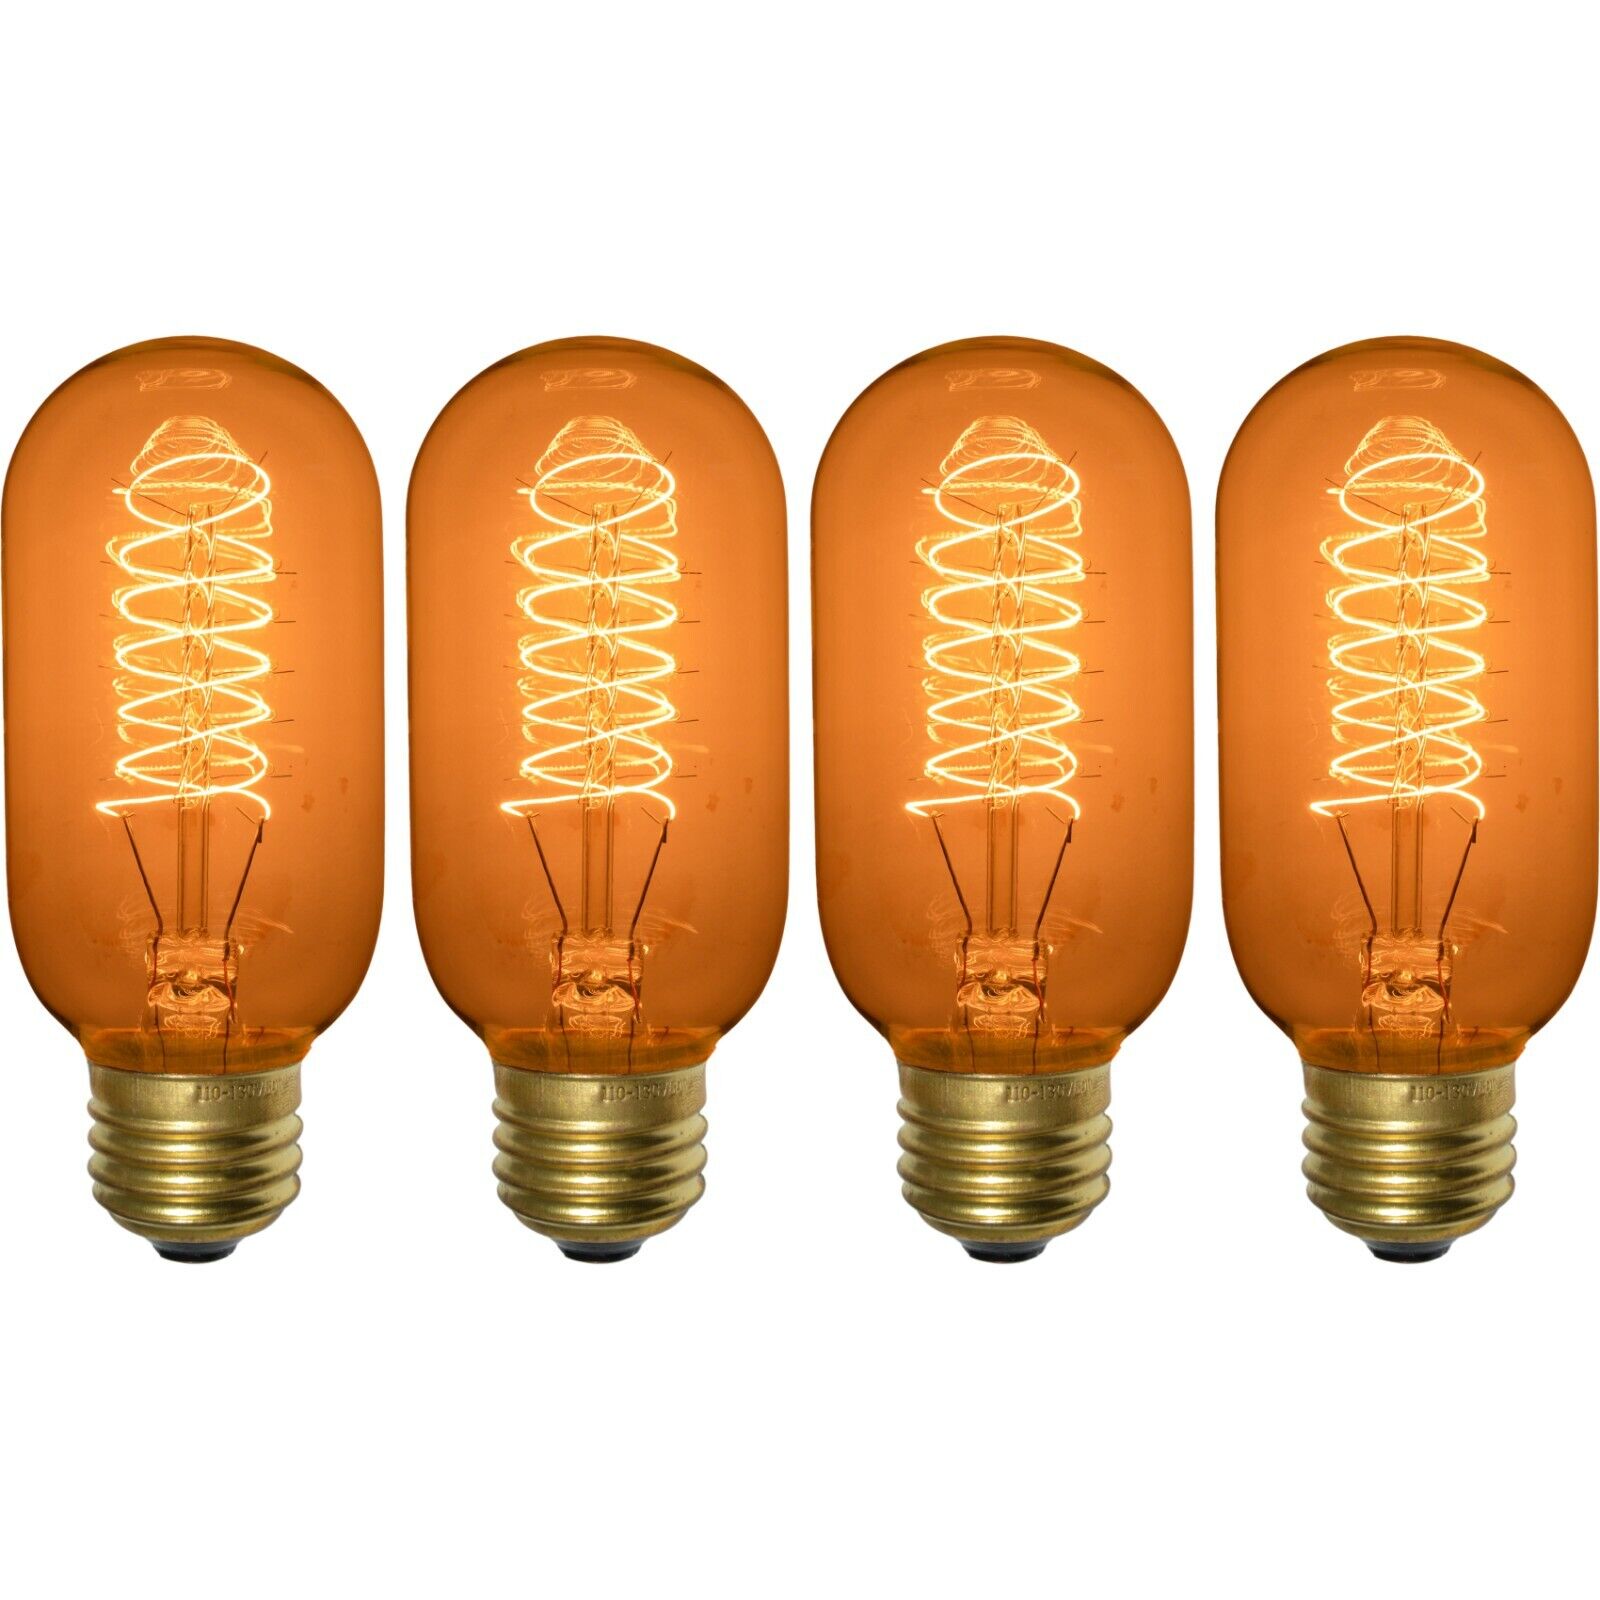 4 Pack of T45 Vintage Edison Light Bulbs, Tubular Style 60W Dimmable 2220K